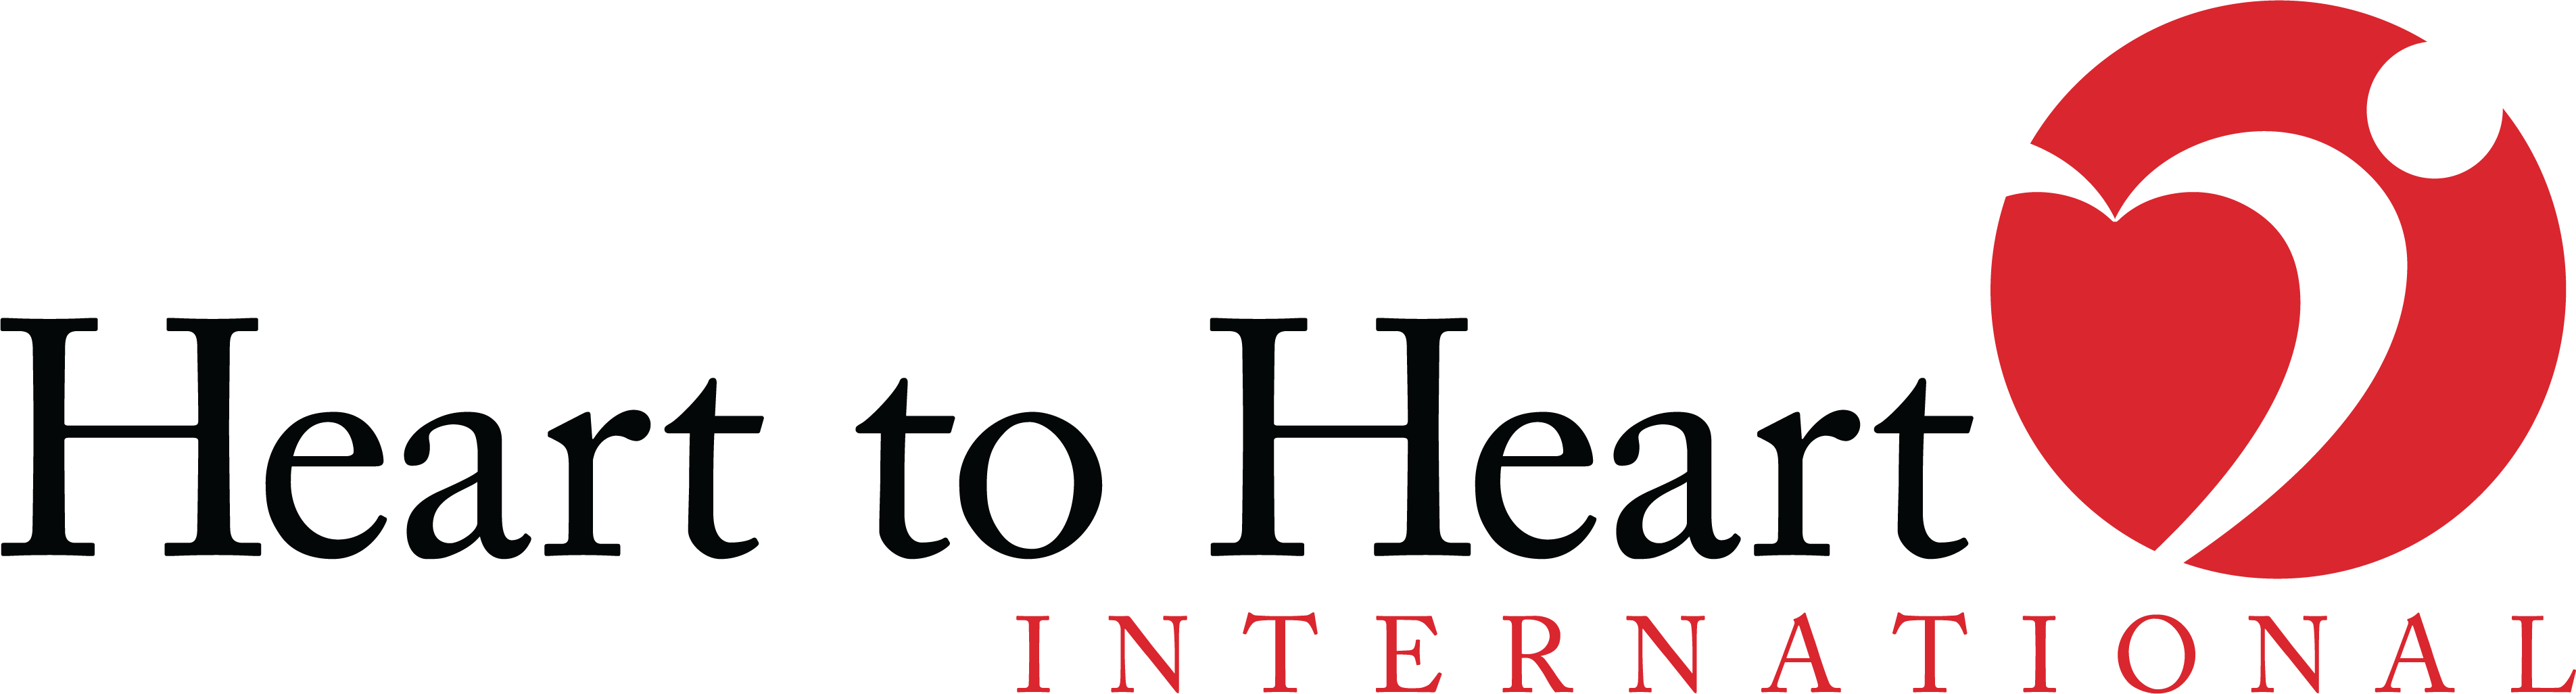 Heart to Heart International Phlebotomy Application Form 